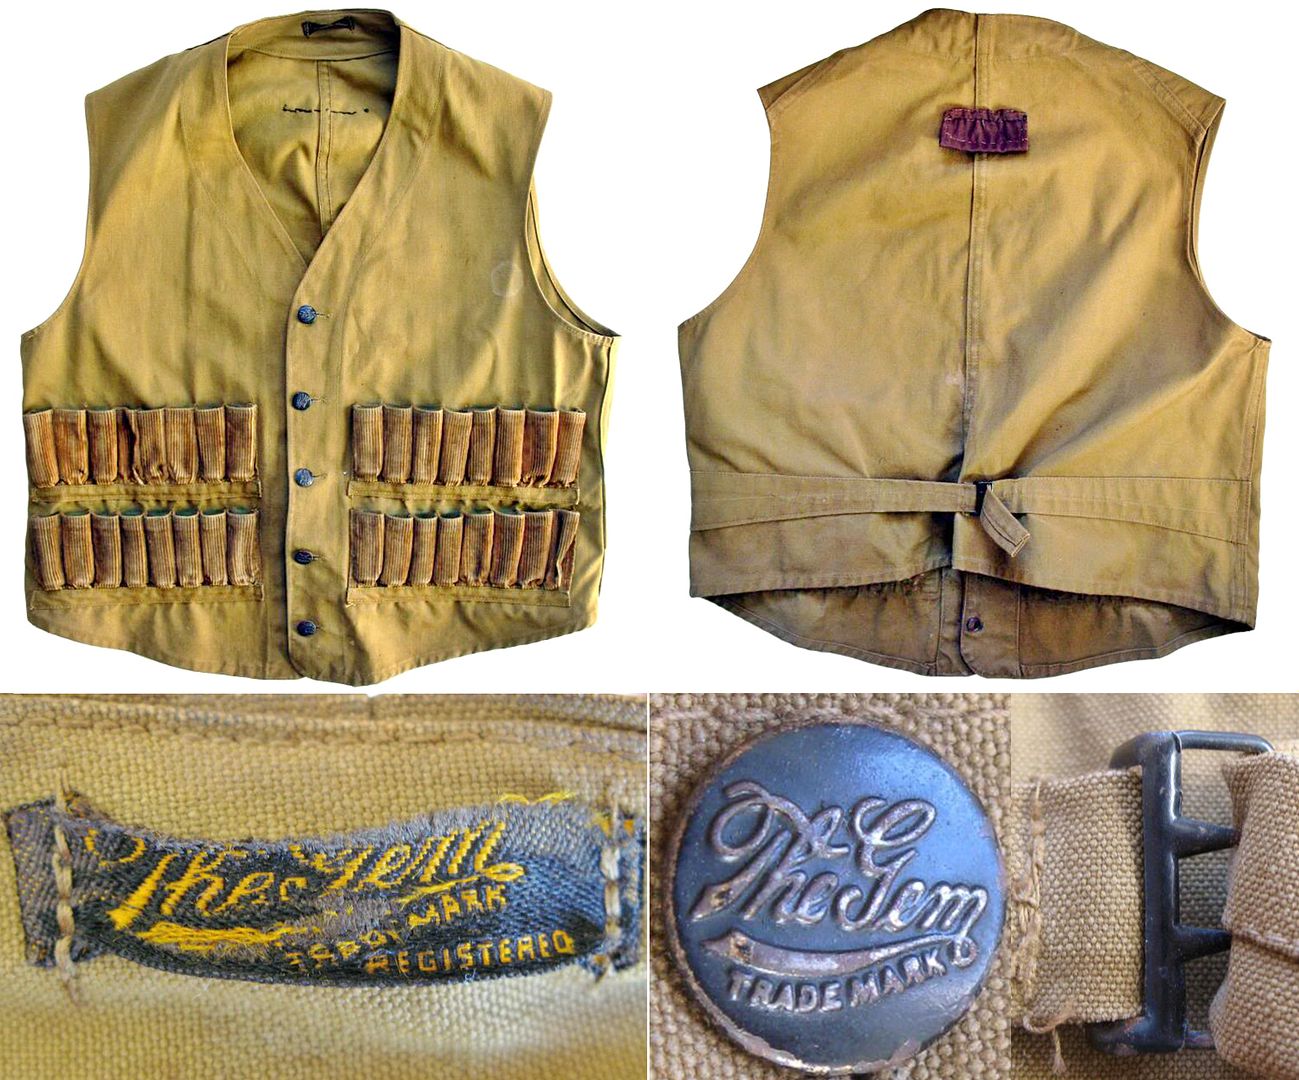 Vintage Hunting Clothes | Page 8 | The Fedora Lounge